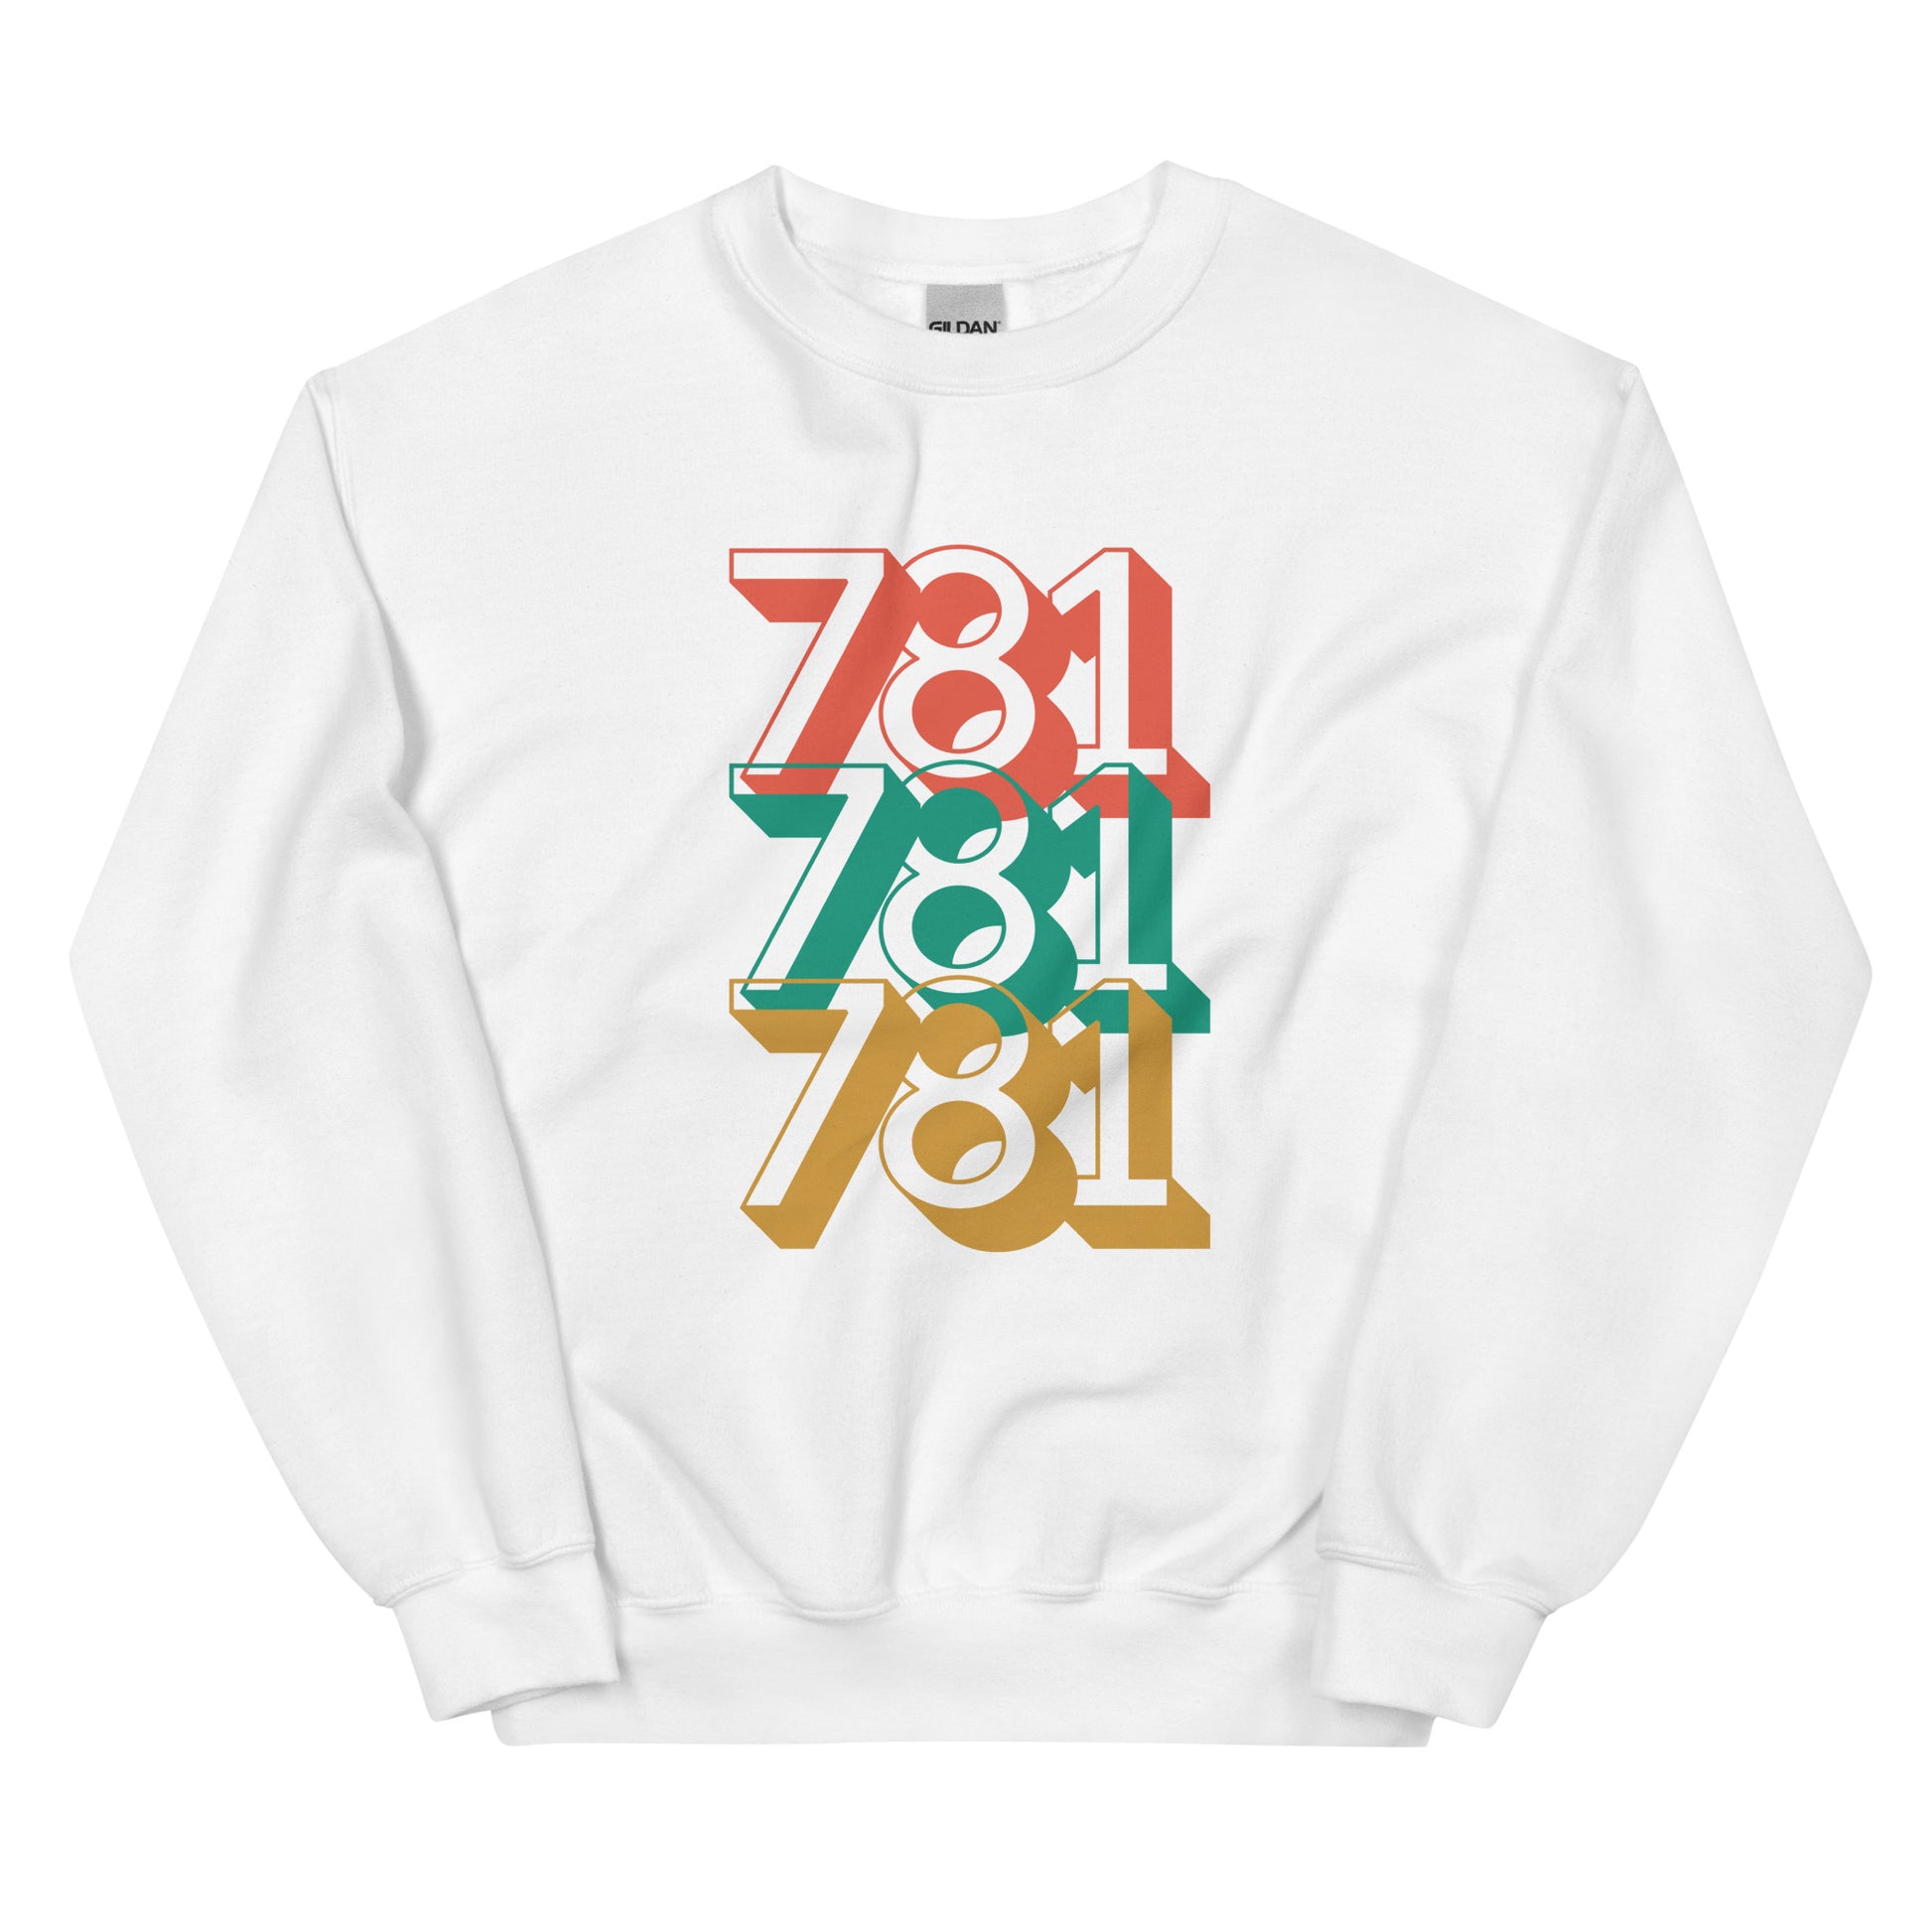 white crewneck with three 781s in red green and yellow